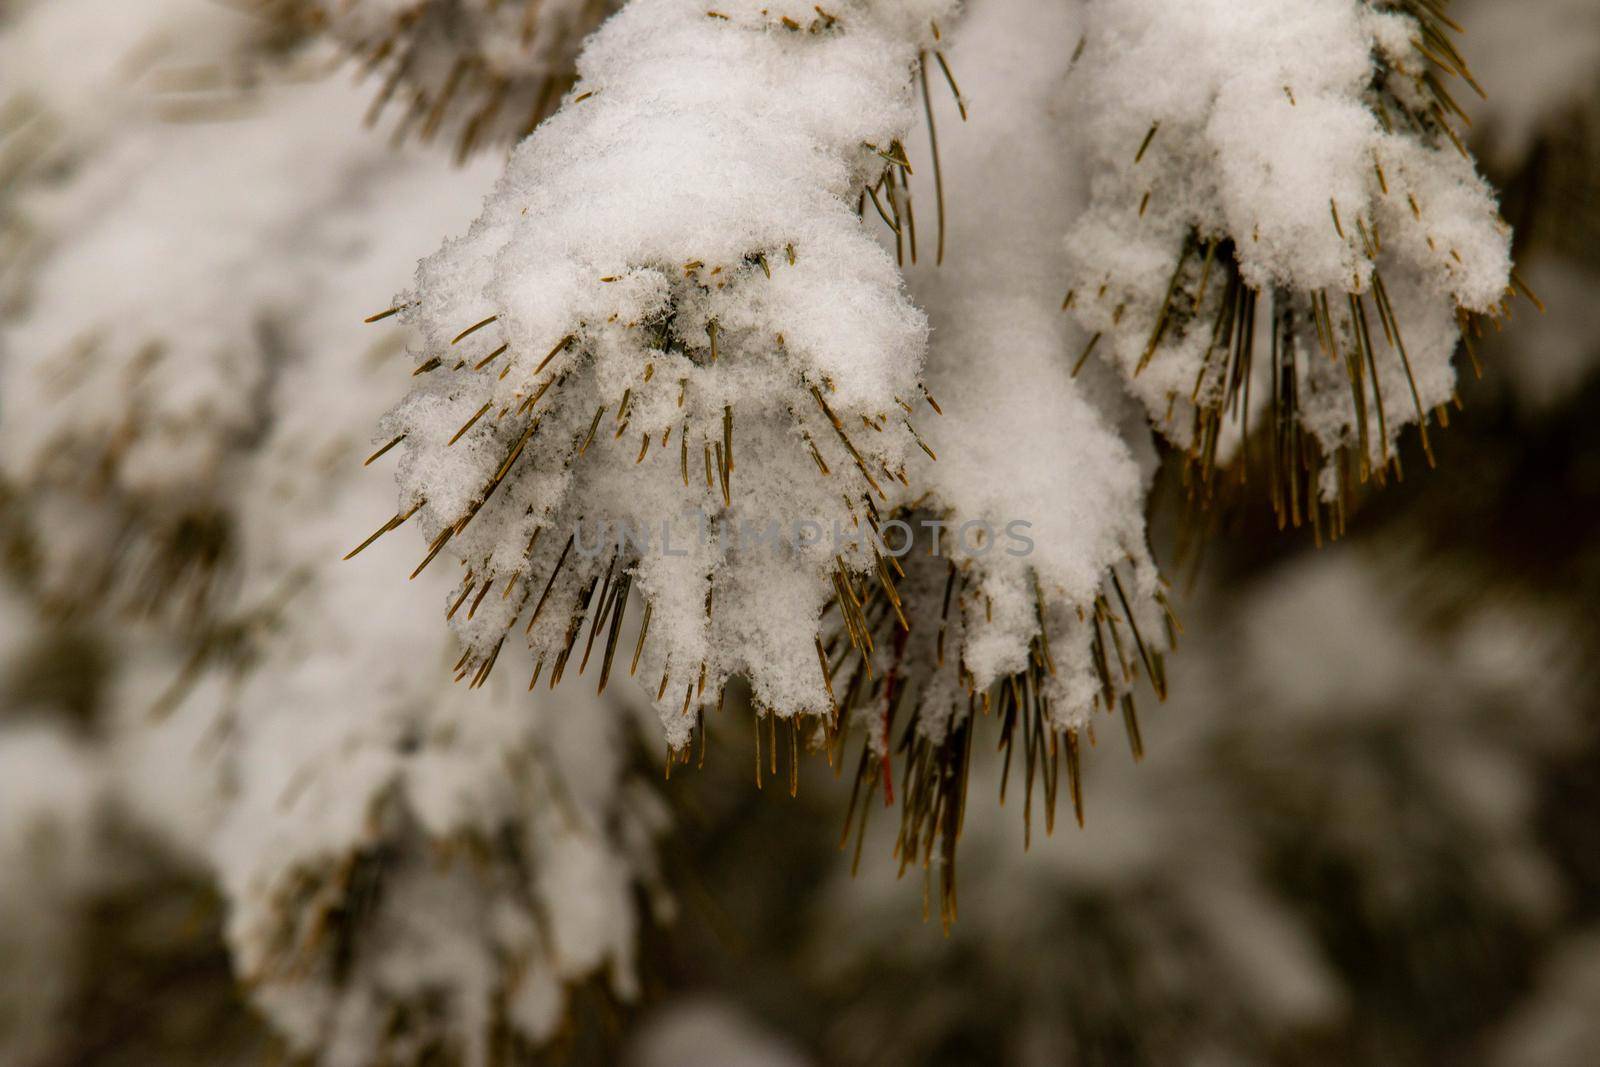 close up photo of snow on a pine tree. High quality photo